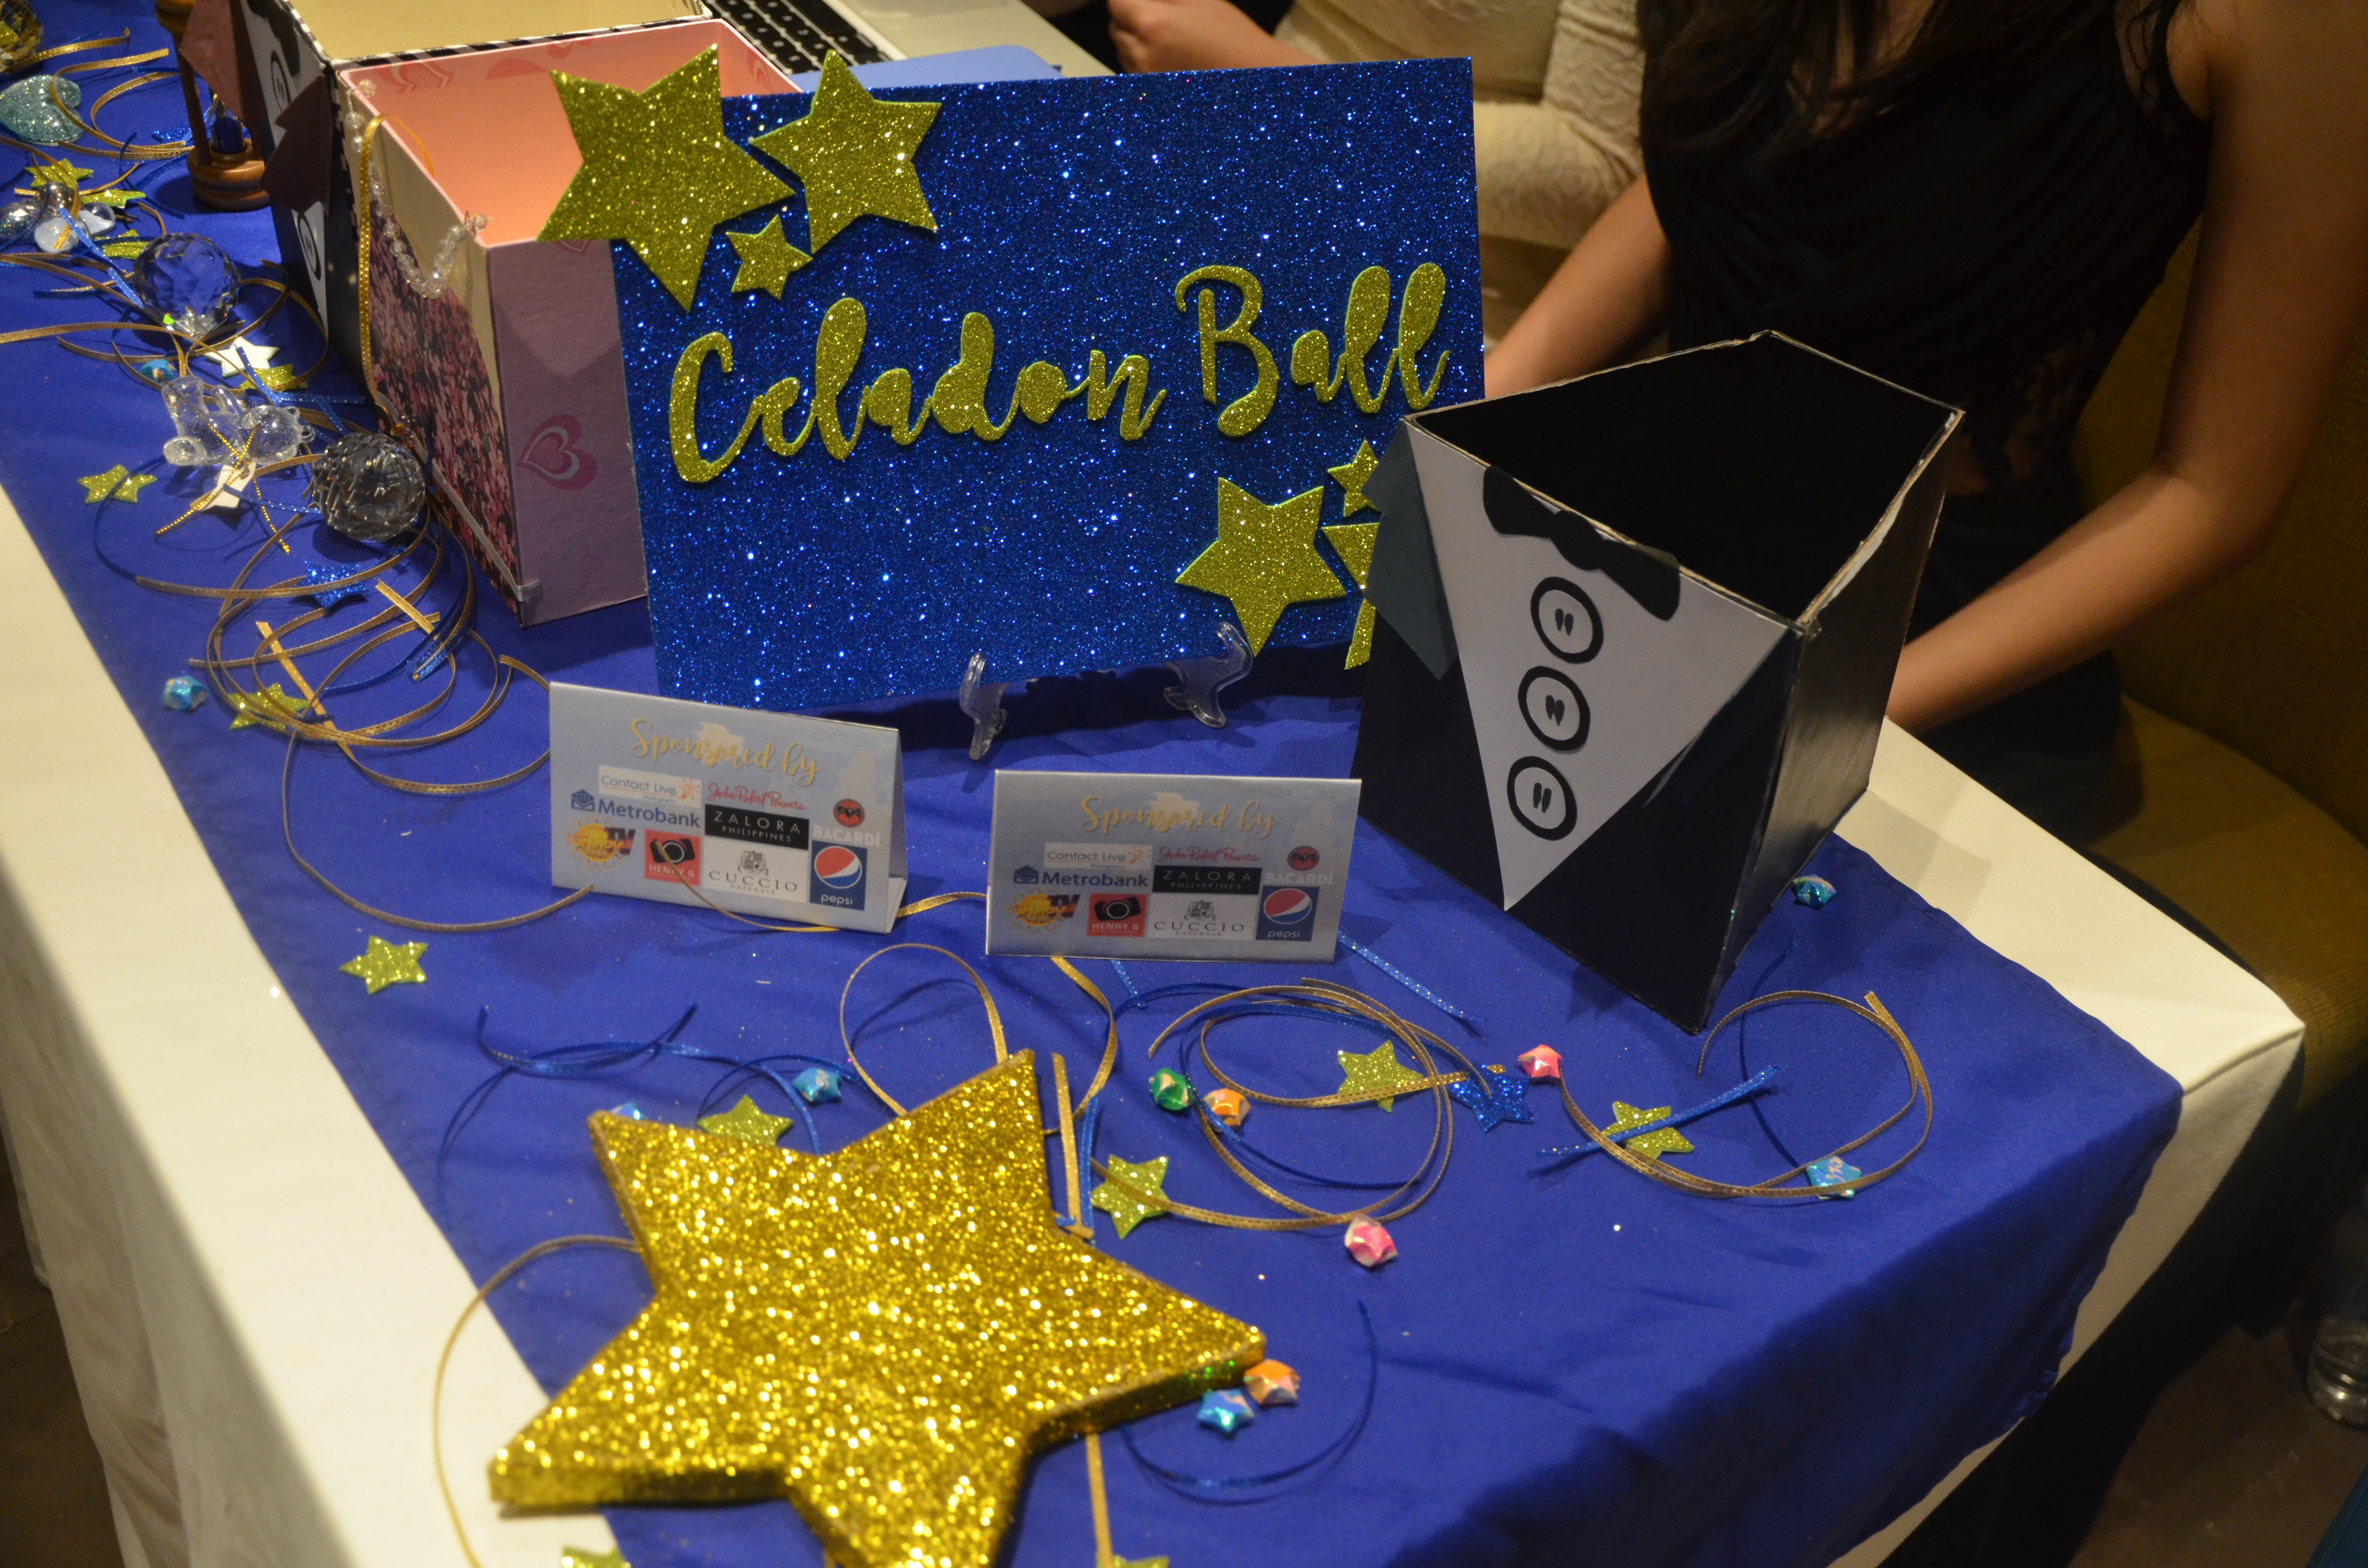 A Night in Neverland: Celadon Ball 2016